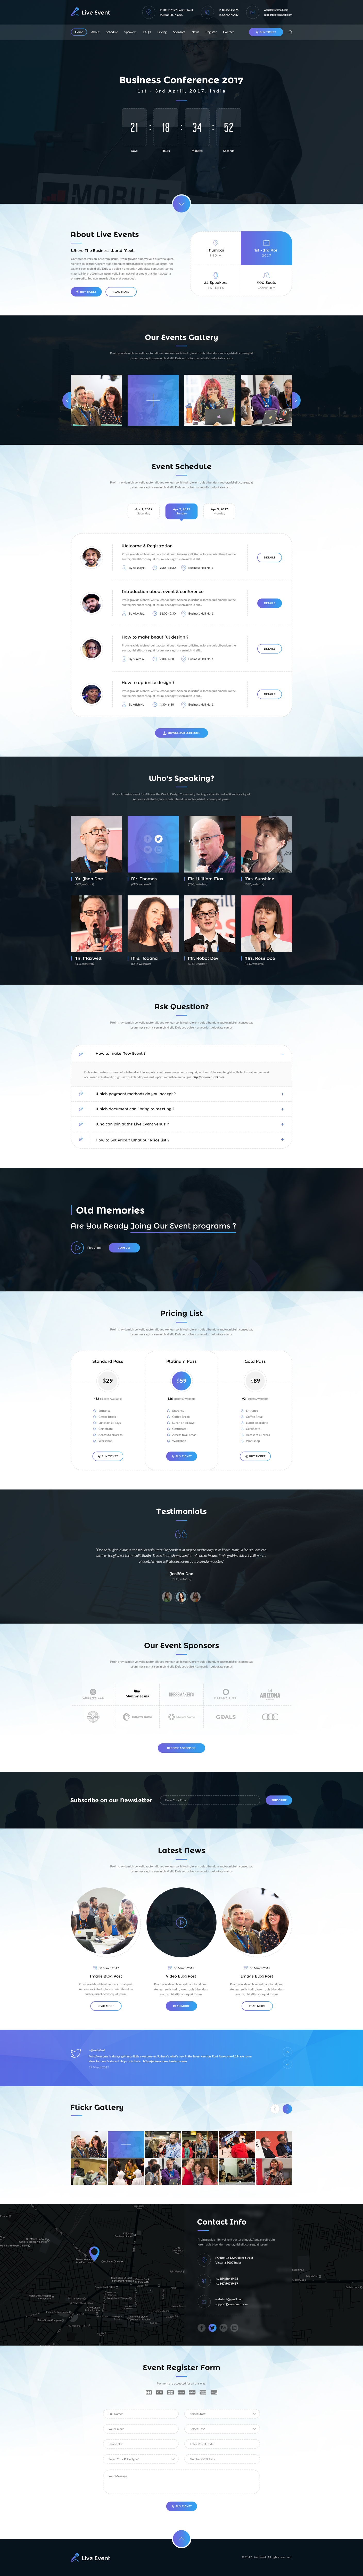 Live Event - Conference and Meetup Muse Template - 1